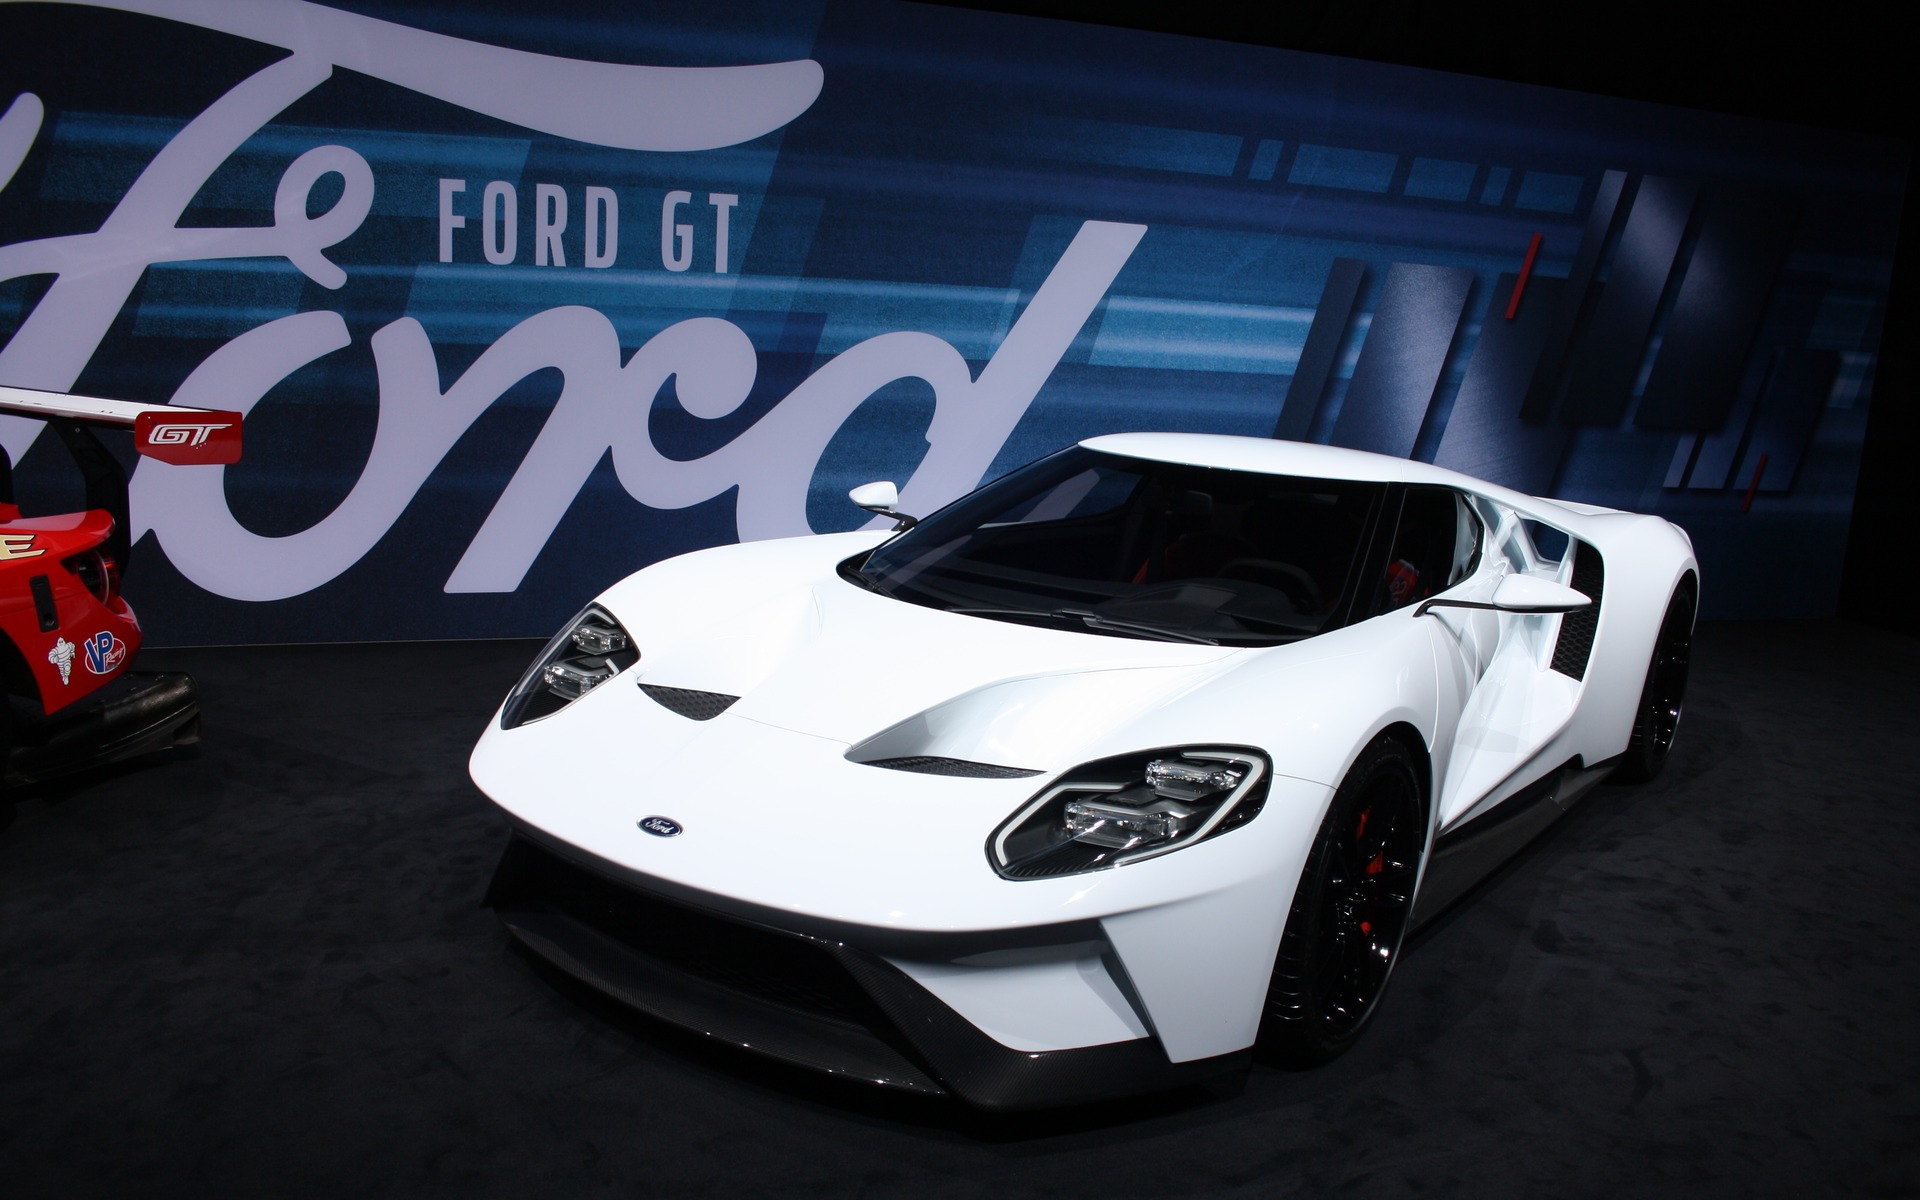 1 : Ford GT